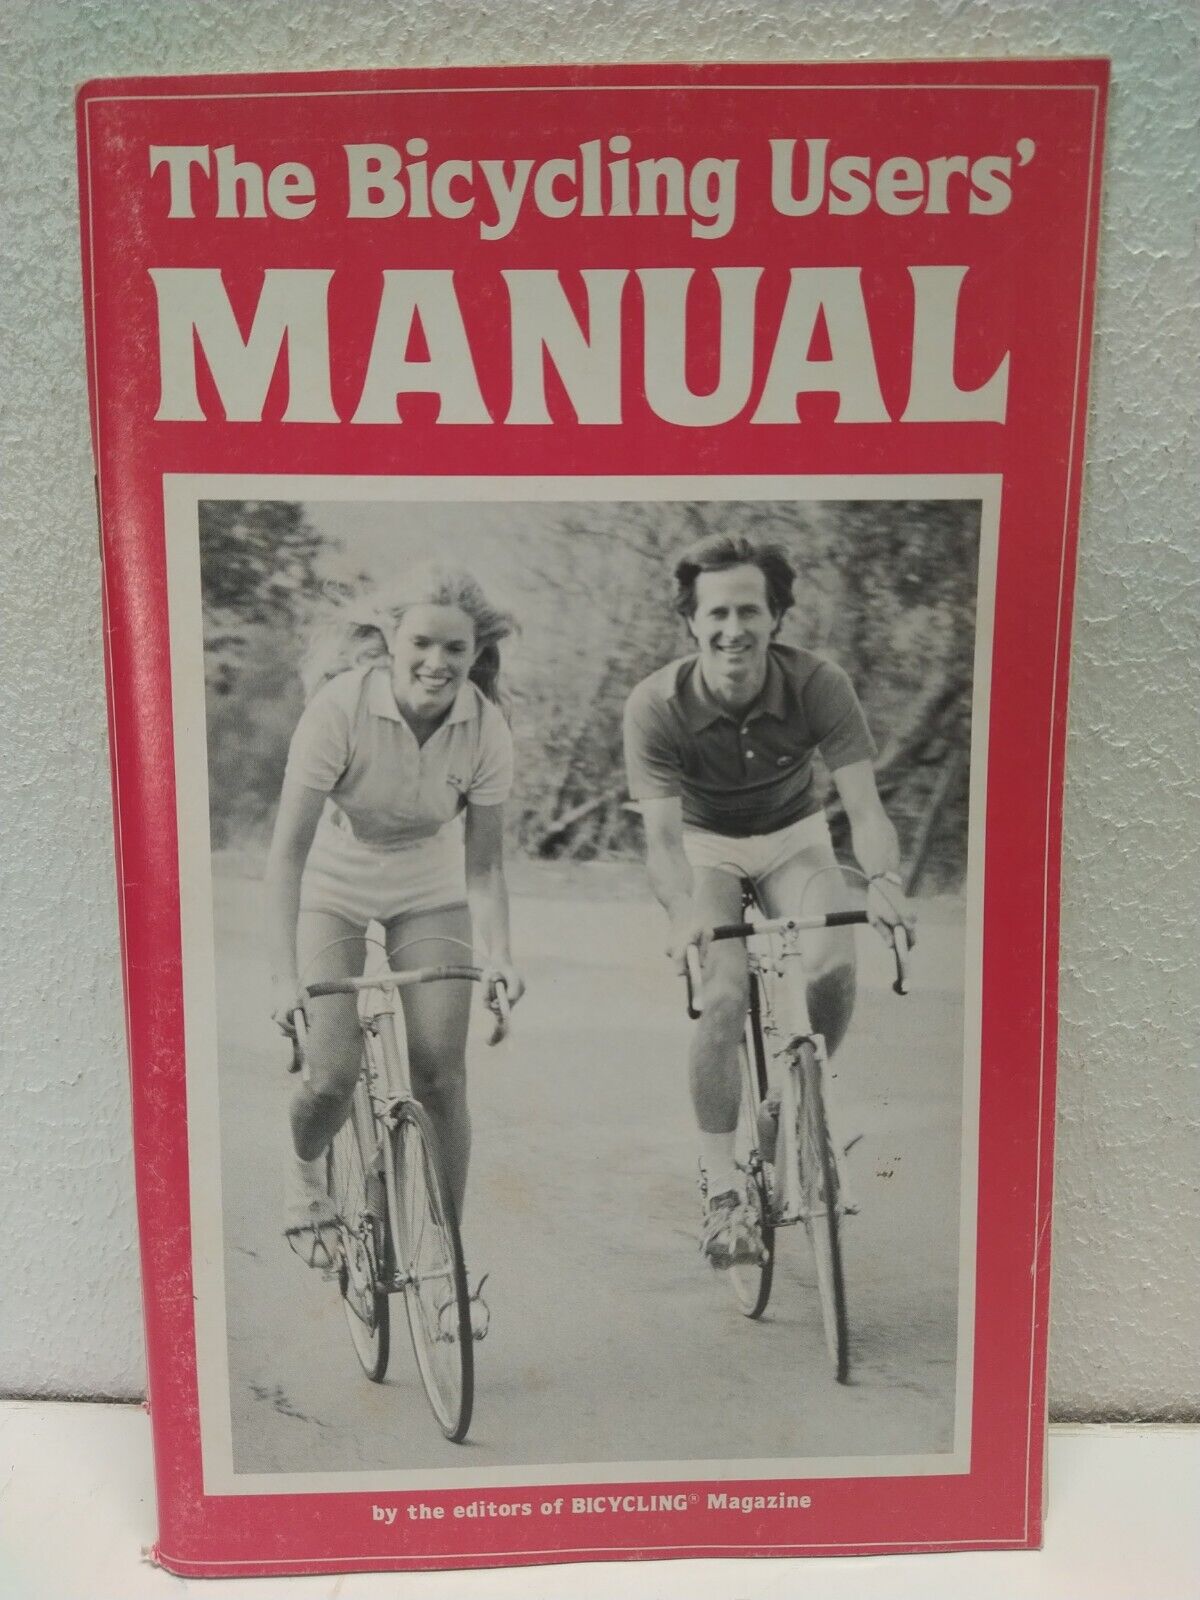 The Bicycling Users\' Manual by editors of Bicycling Magazine 1982 book printing